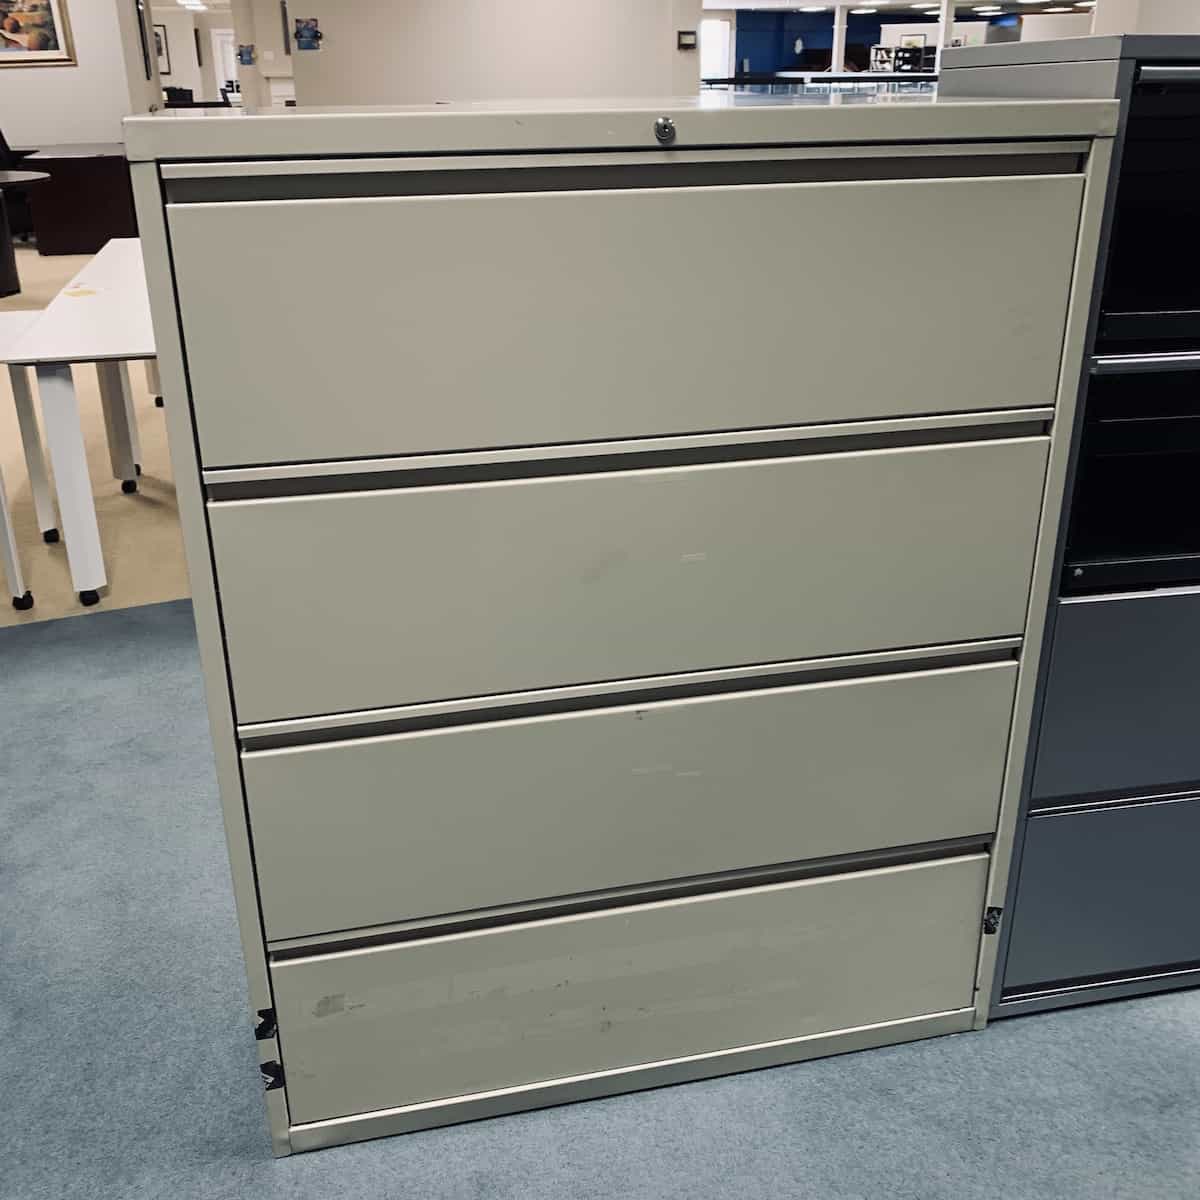 tan-4-drawer-lateral-file-retractable